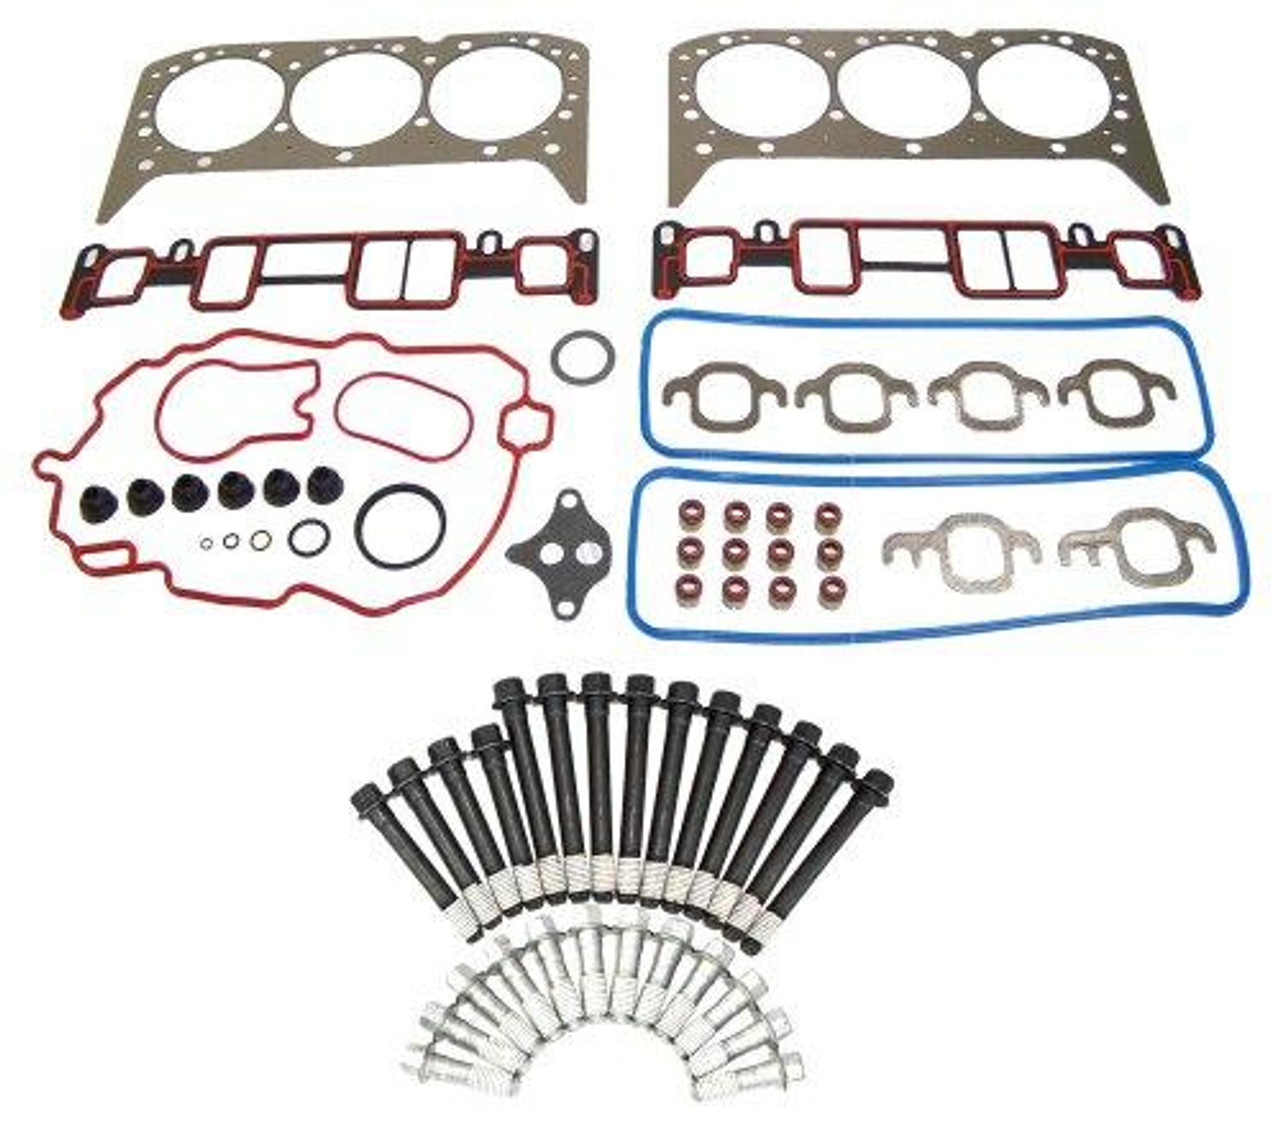 Head Gasket Set with Head Bolt Kit - 1999 Chevrolet Astro 4.3L Engine Parts # HGB3129ZE4